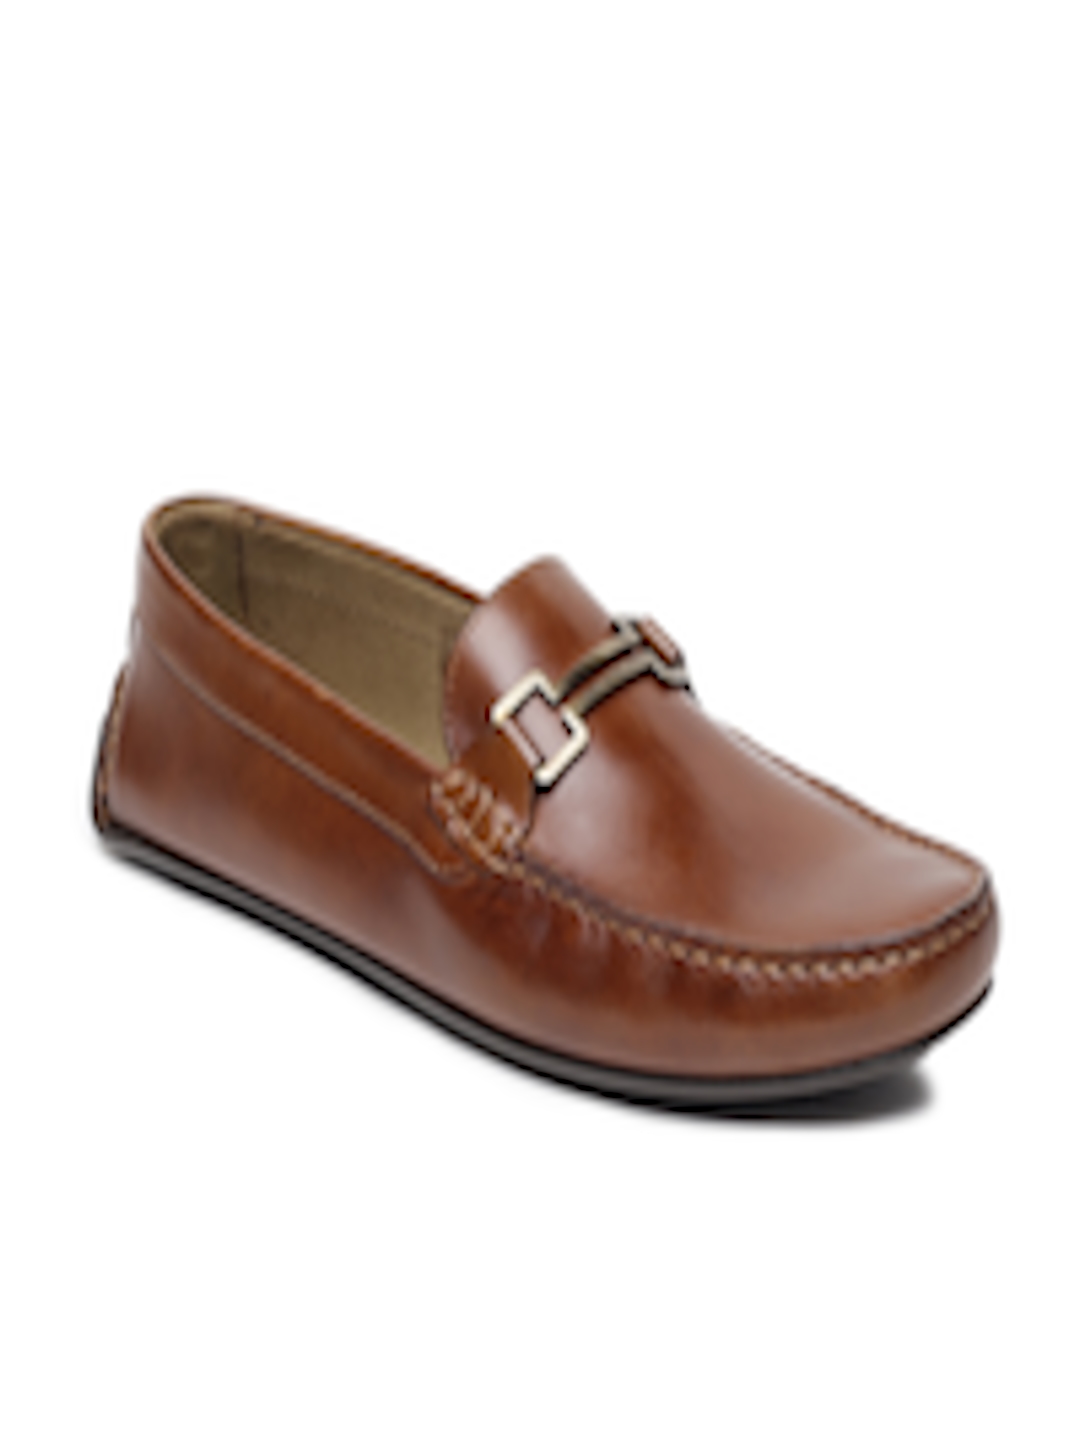 Buy Louis Philippe Men Tan Leather Loafers - Formal Shoes for Men ...